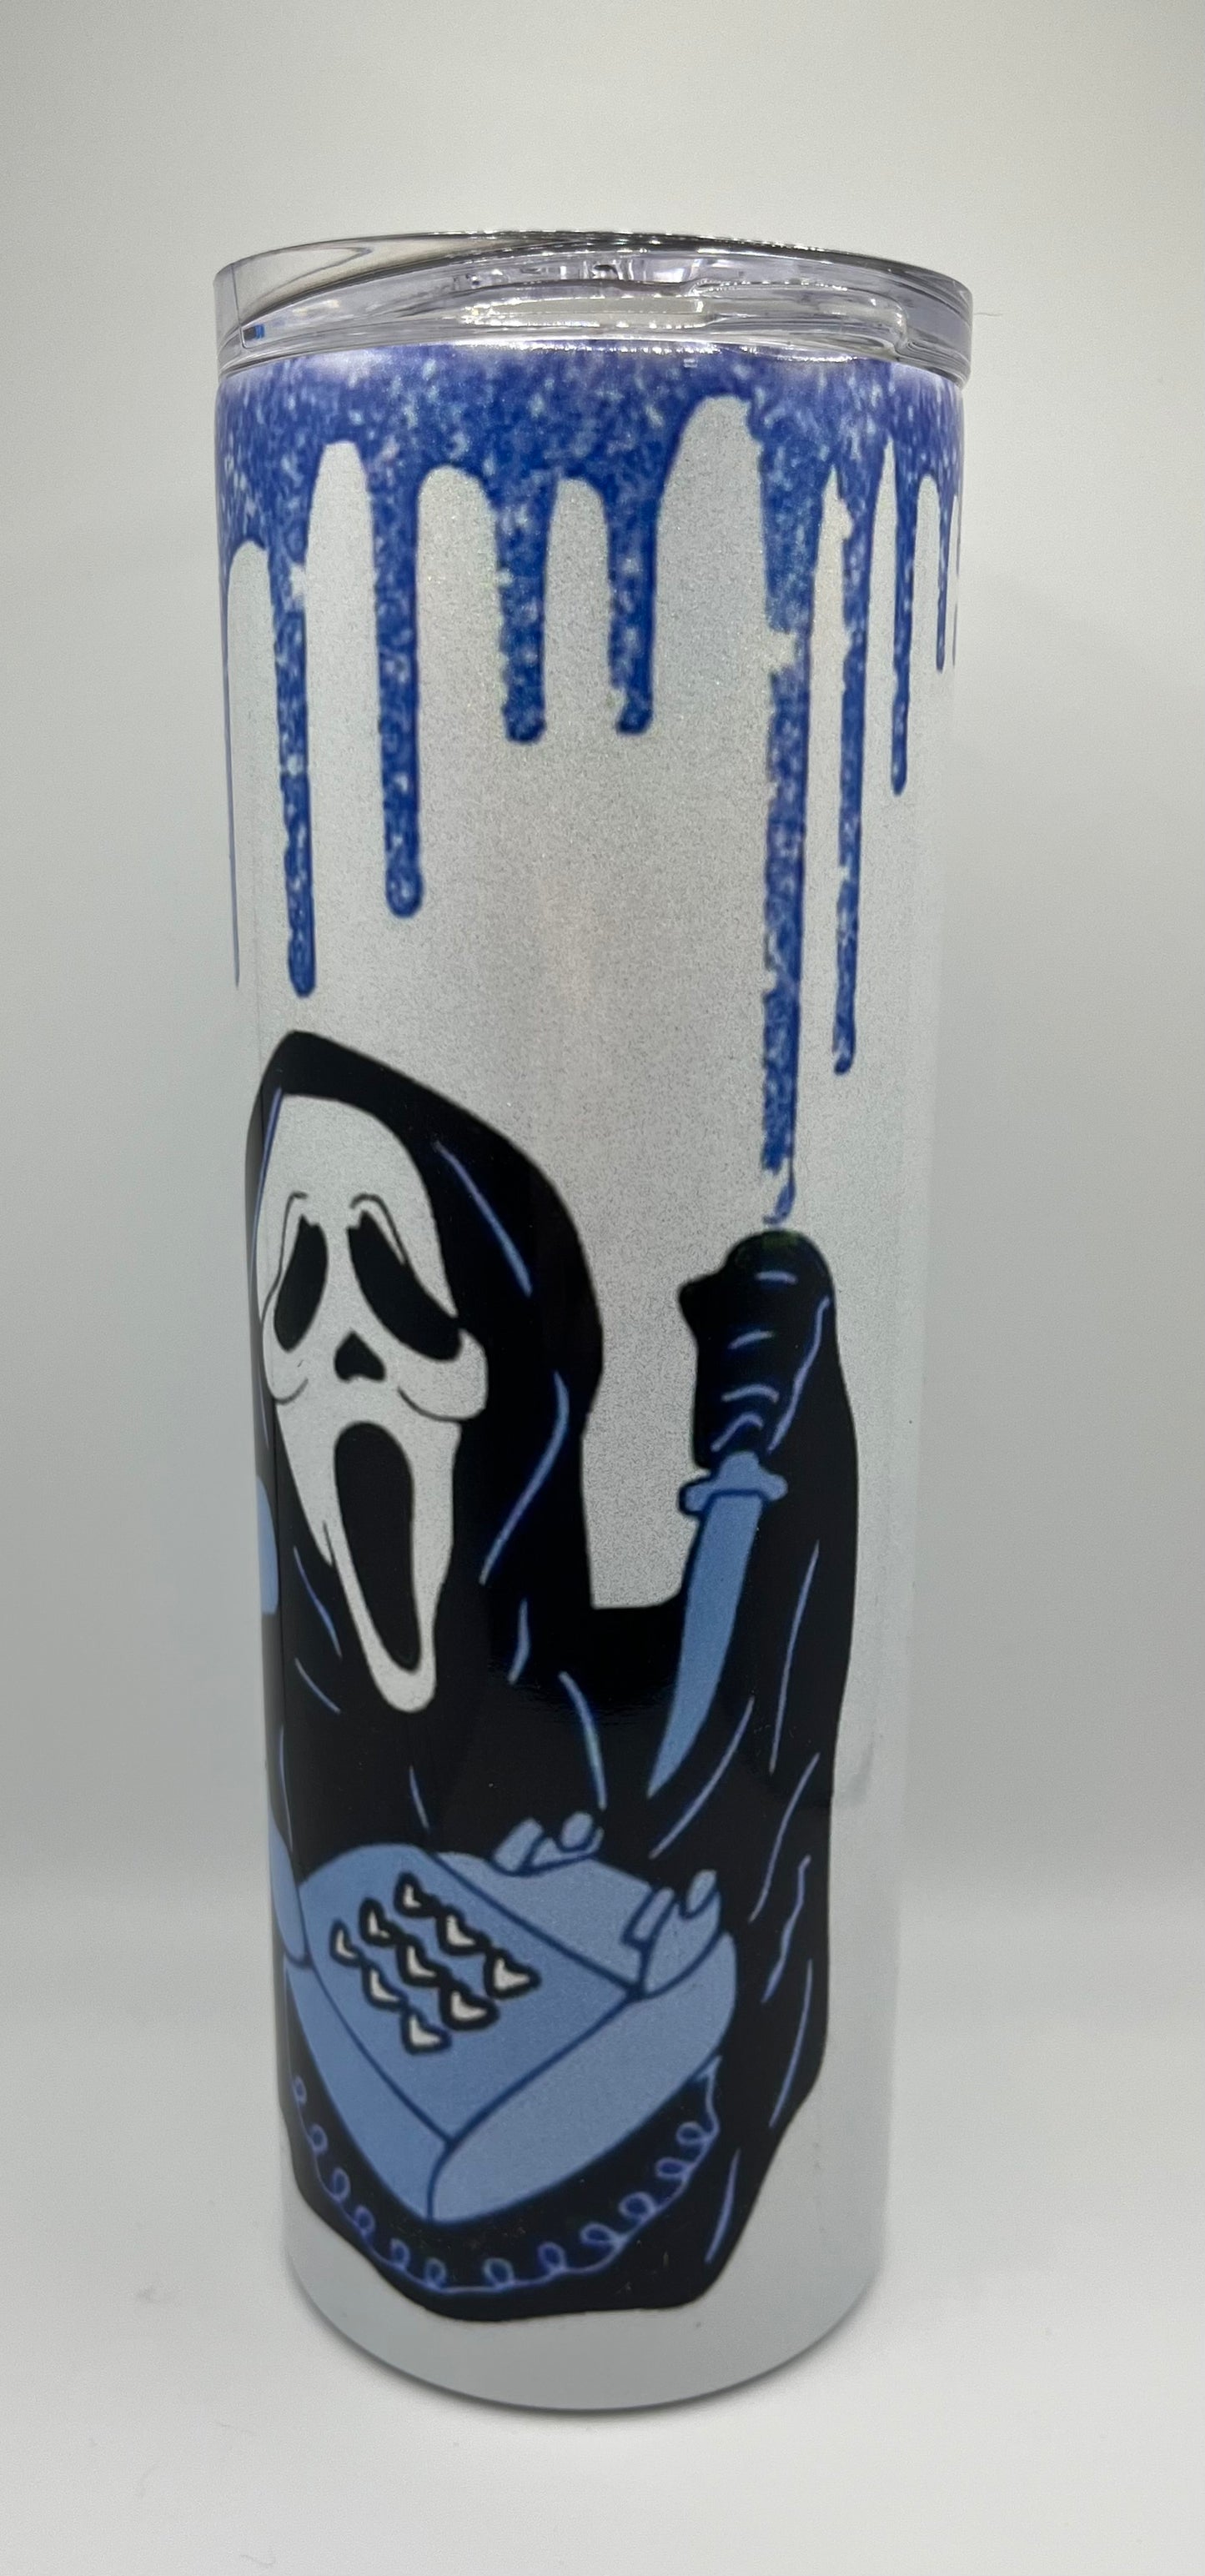 Ghost Face “You Hang Up First” Blue Glitter Drip 20oz Steel Tumbler